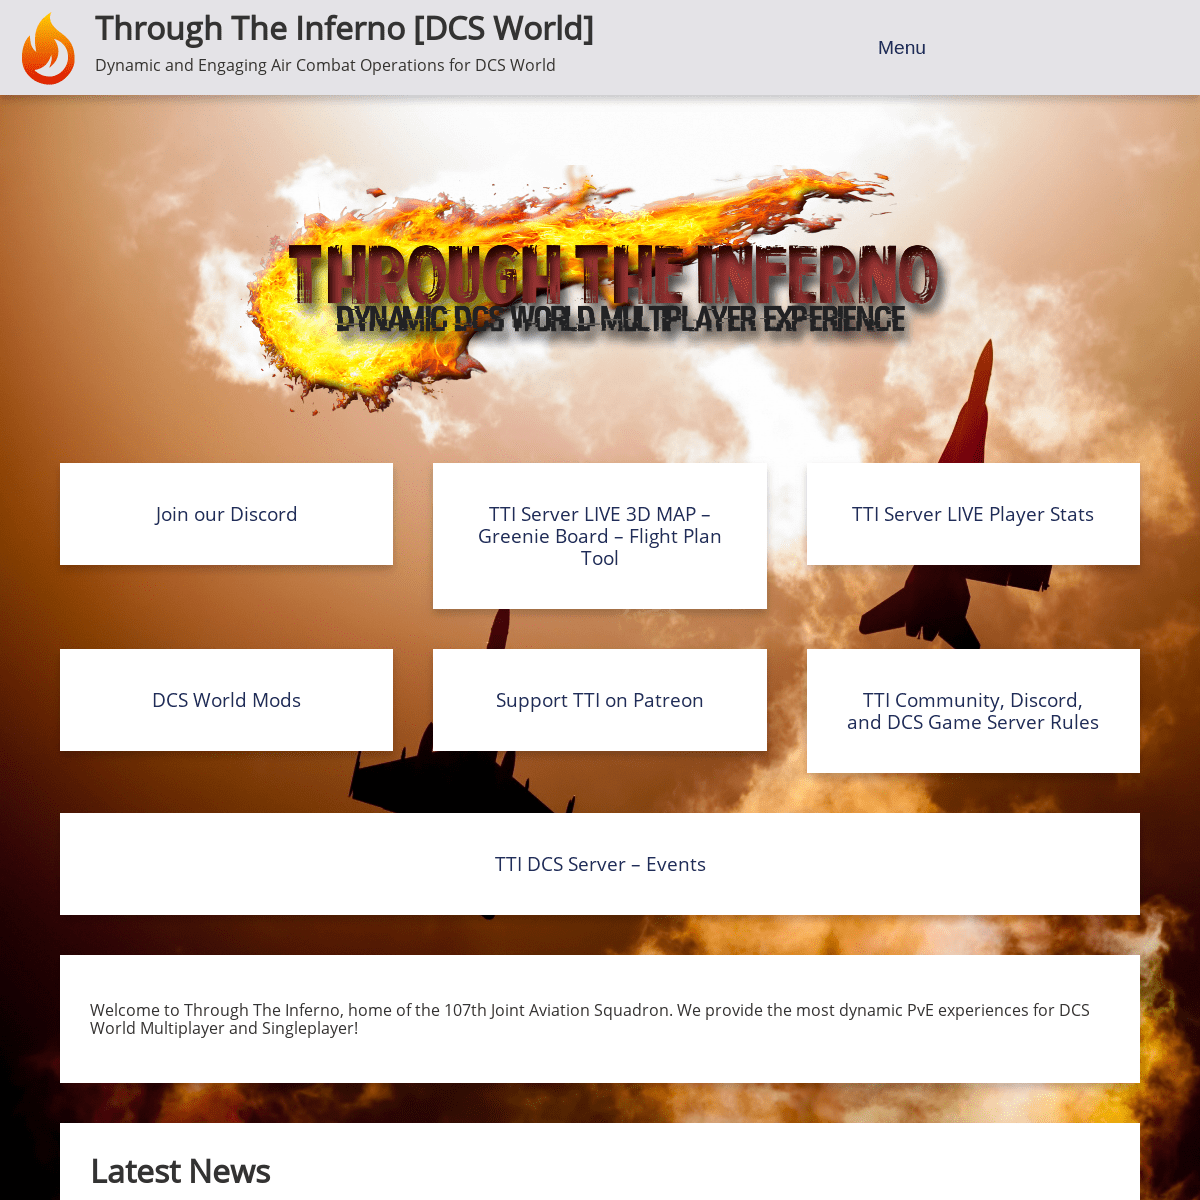 A complete backup of throughtheinferno.com